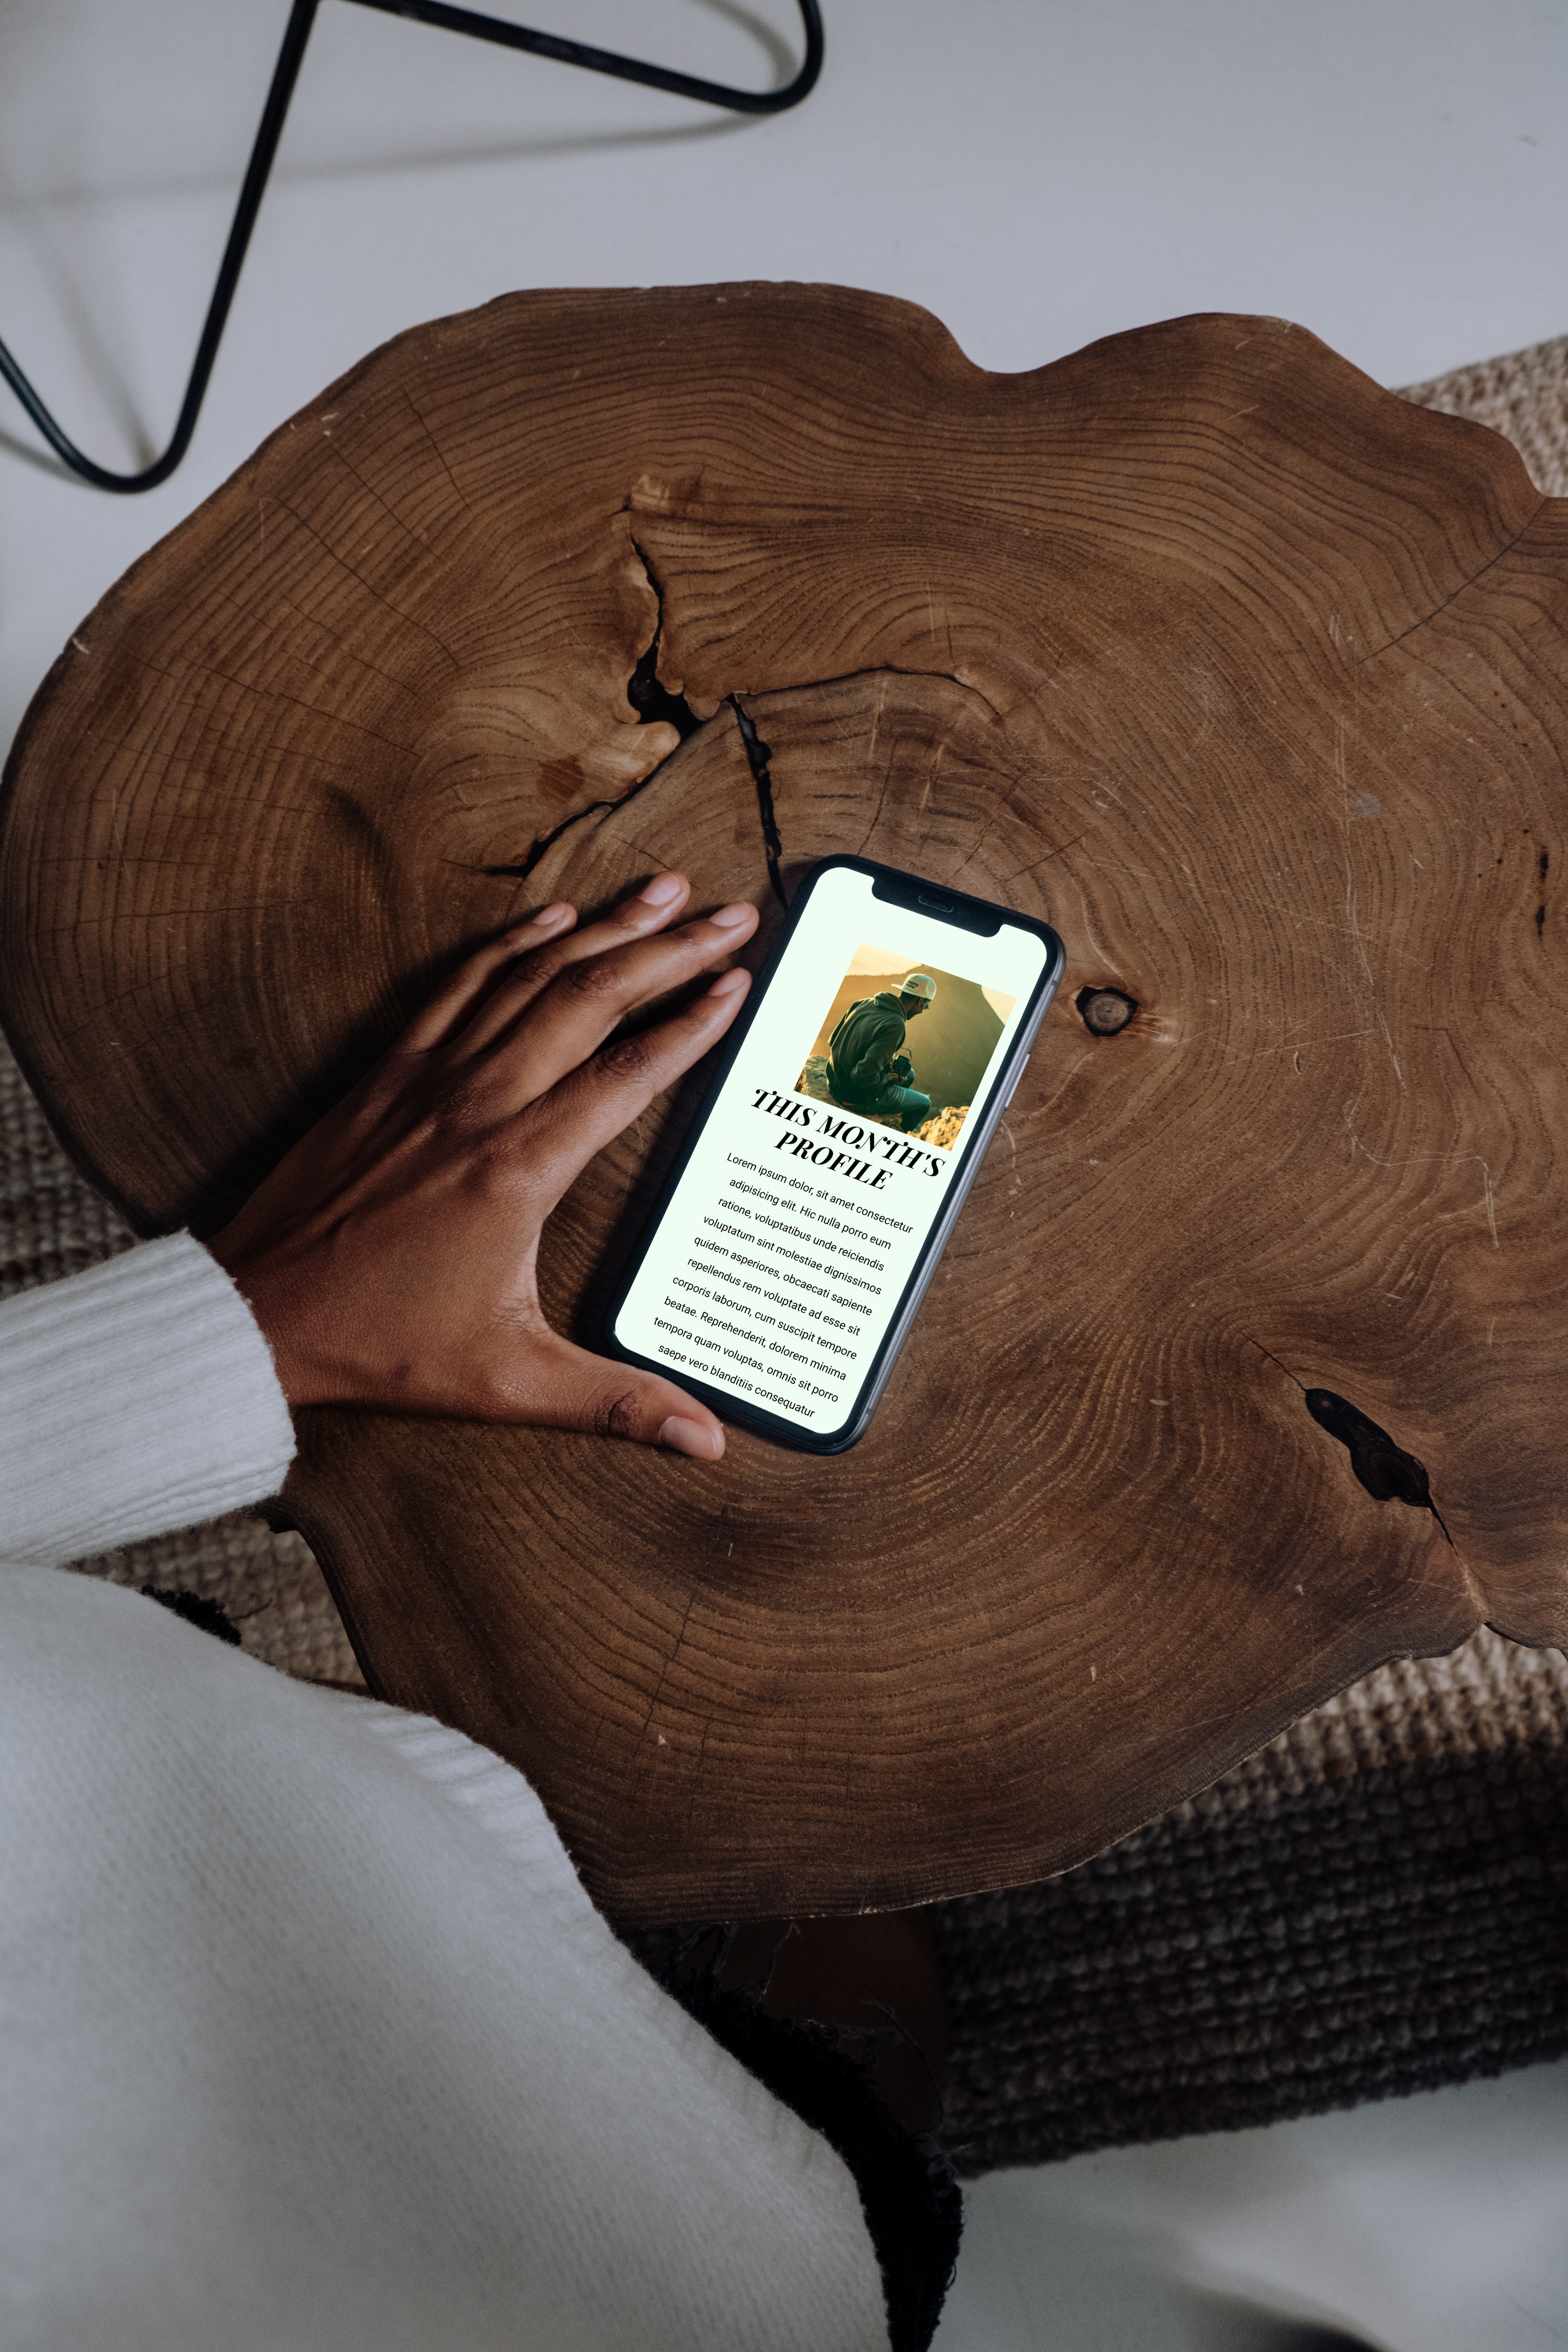 Hand resting on a wooden table scrolling a phone with image of Captured website